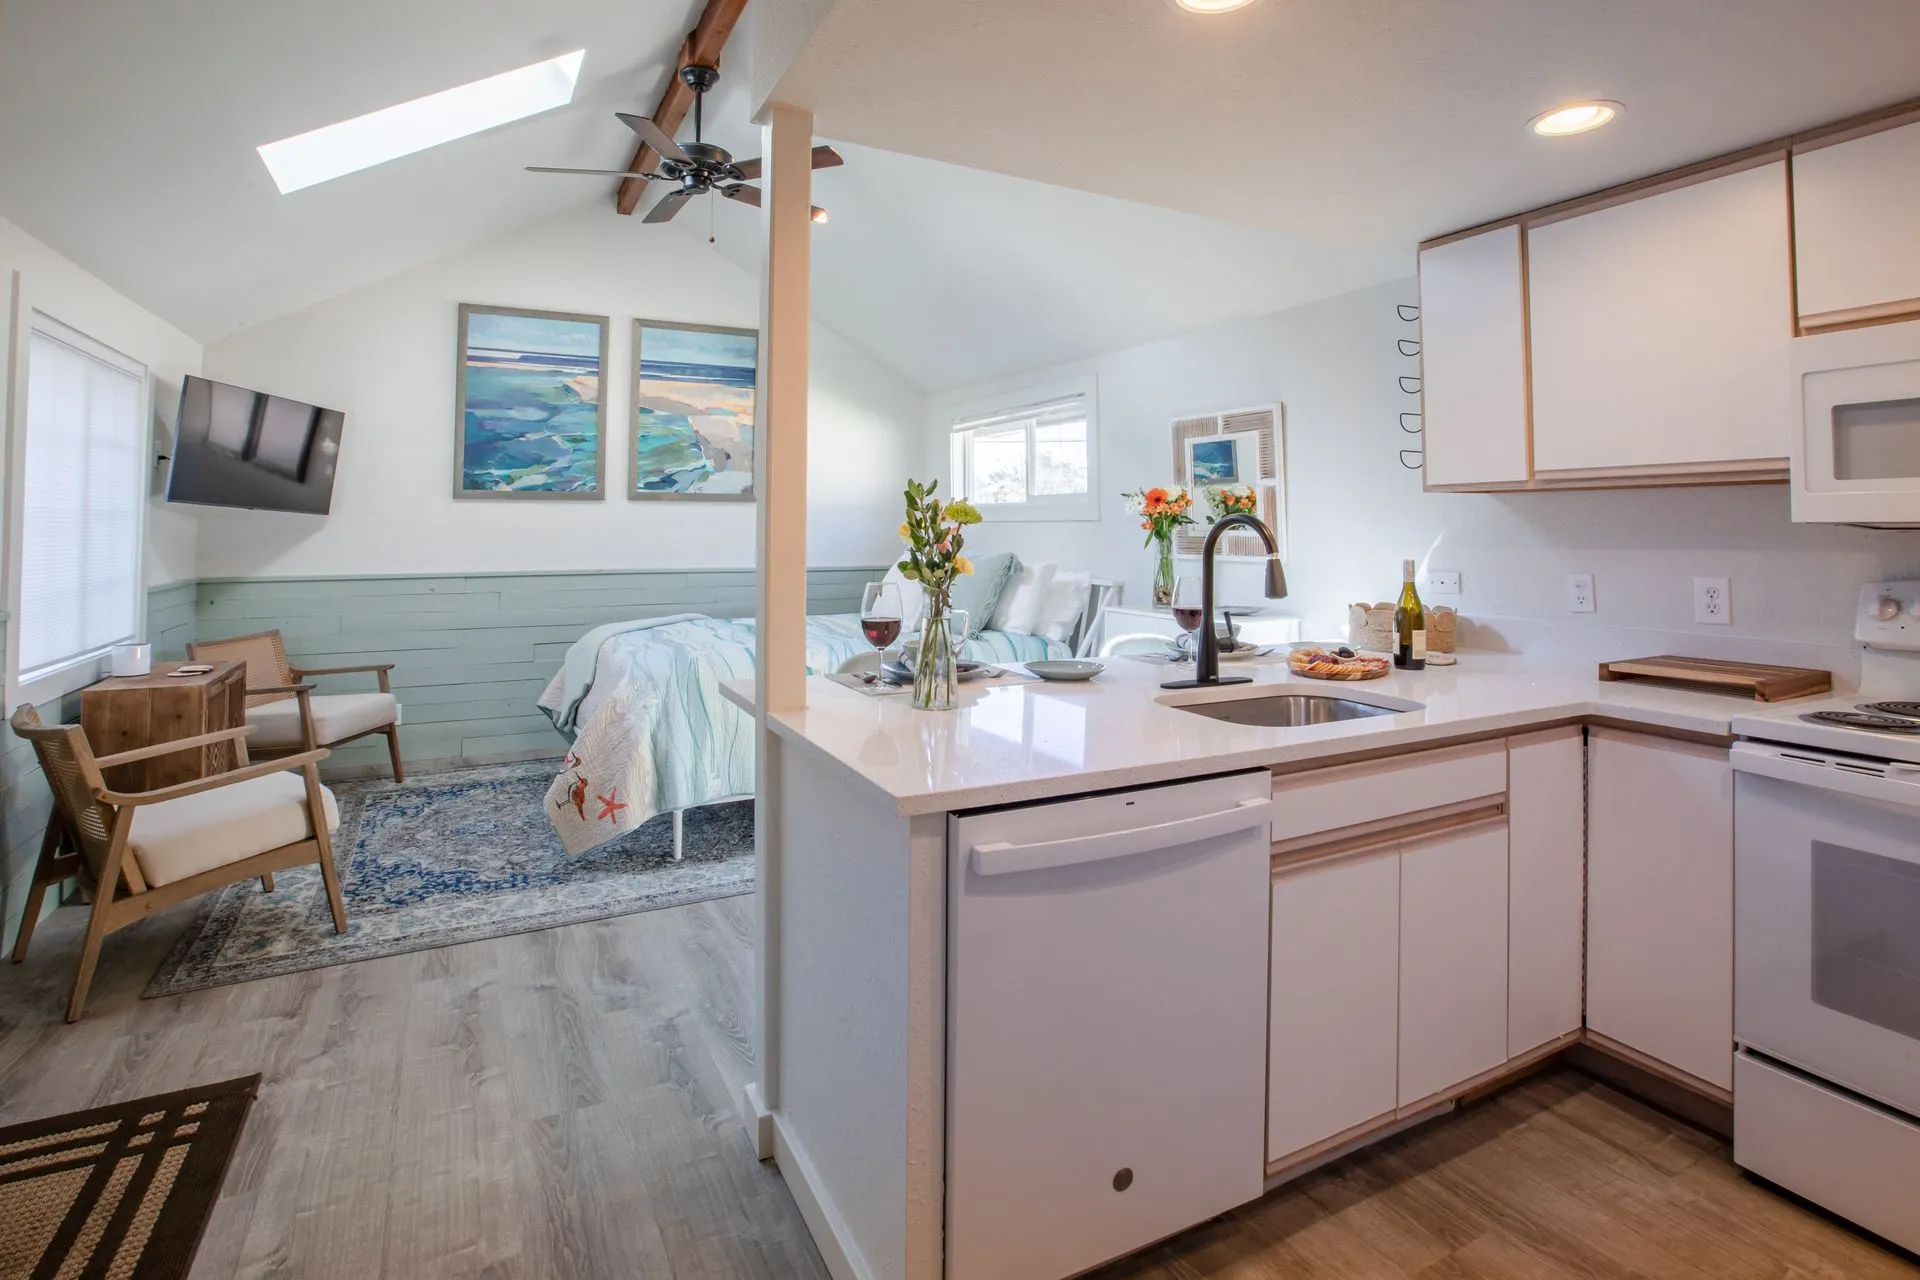 Vacation Rental in Cannon Beach, Sand Crab kitchen with view of the bed